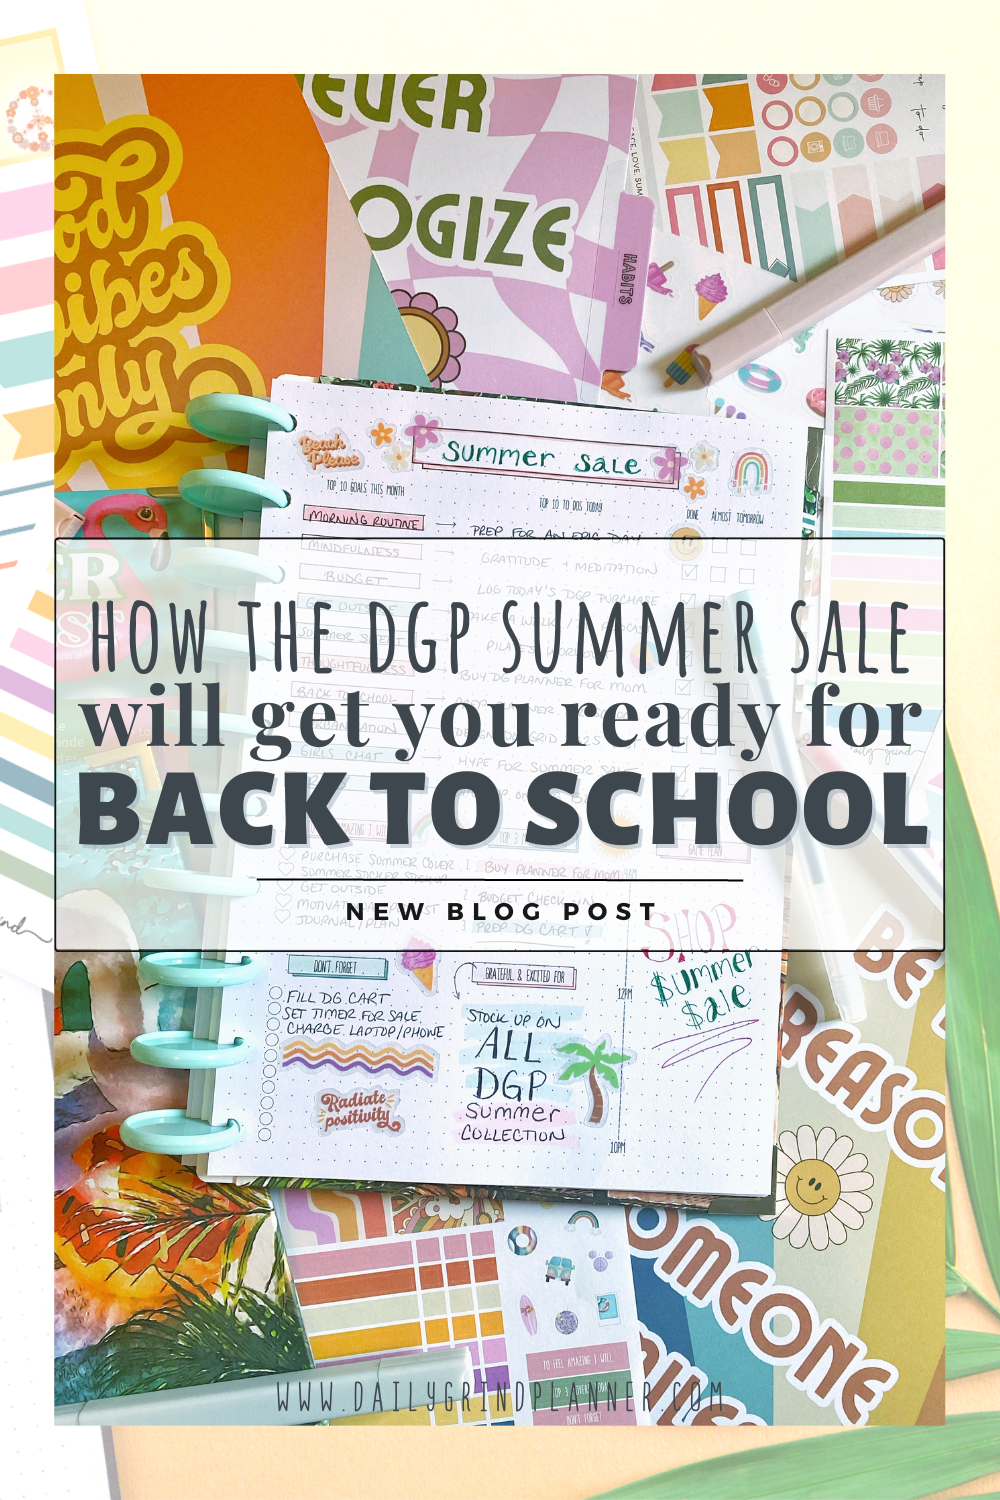 10 WAYS THE DGP SUMMER SALE WILL GET YOU READY FOR BACK TO SCHOOL